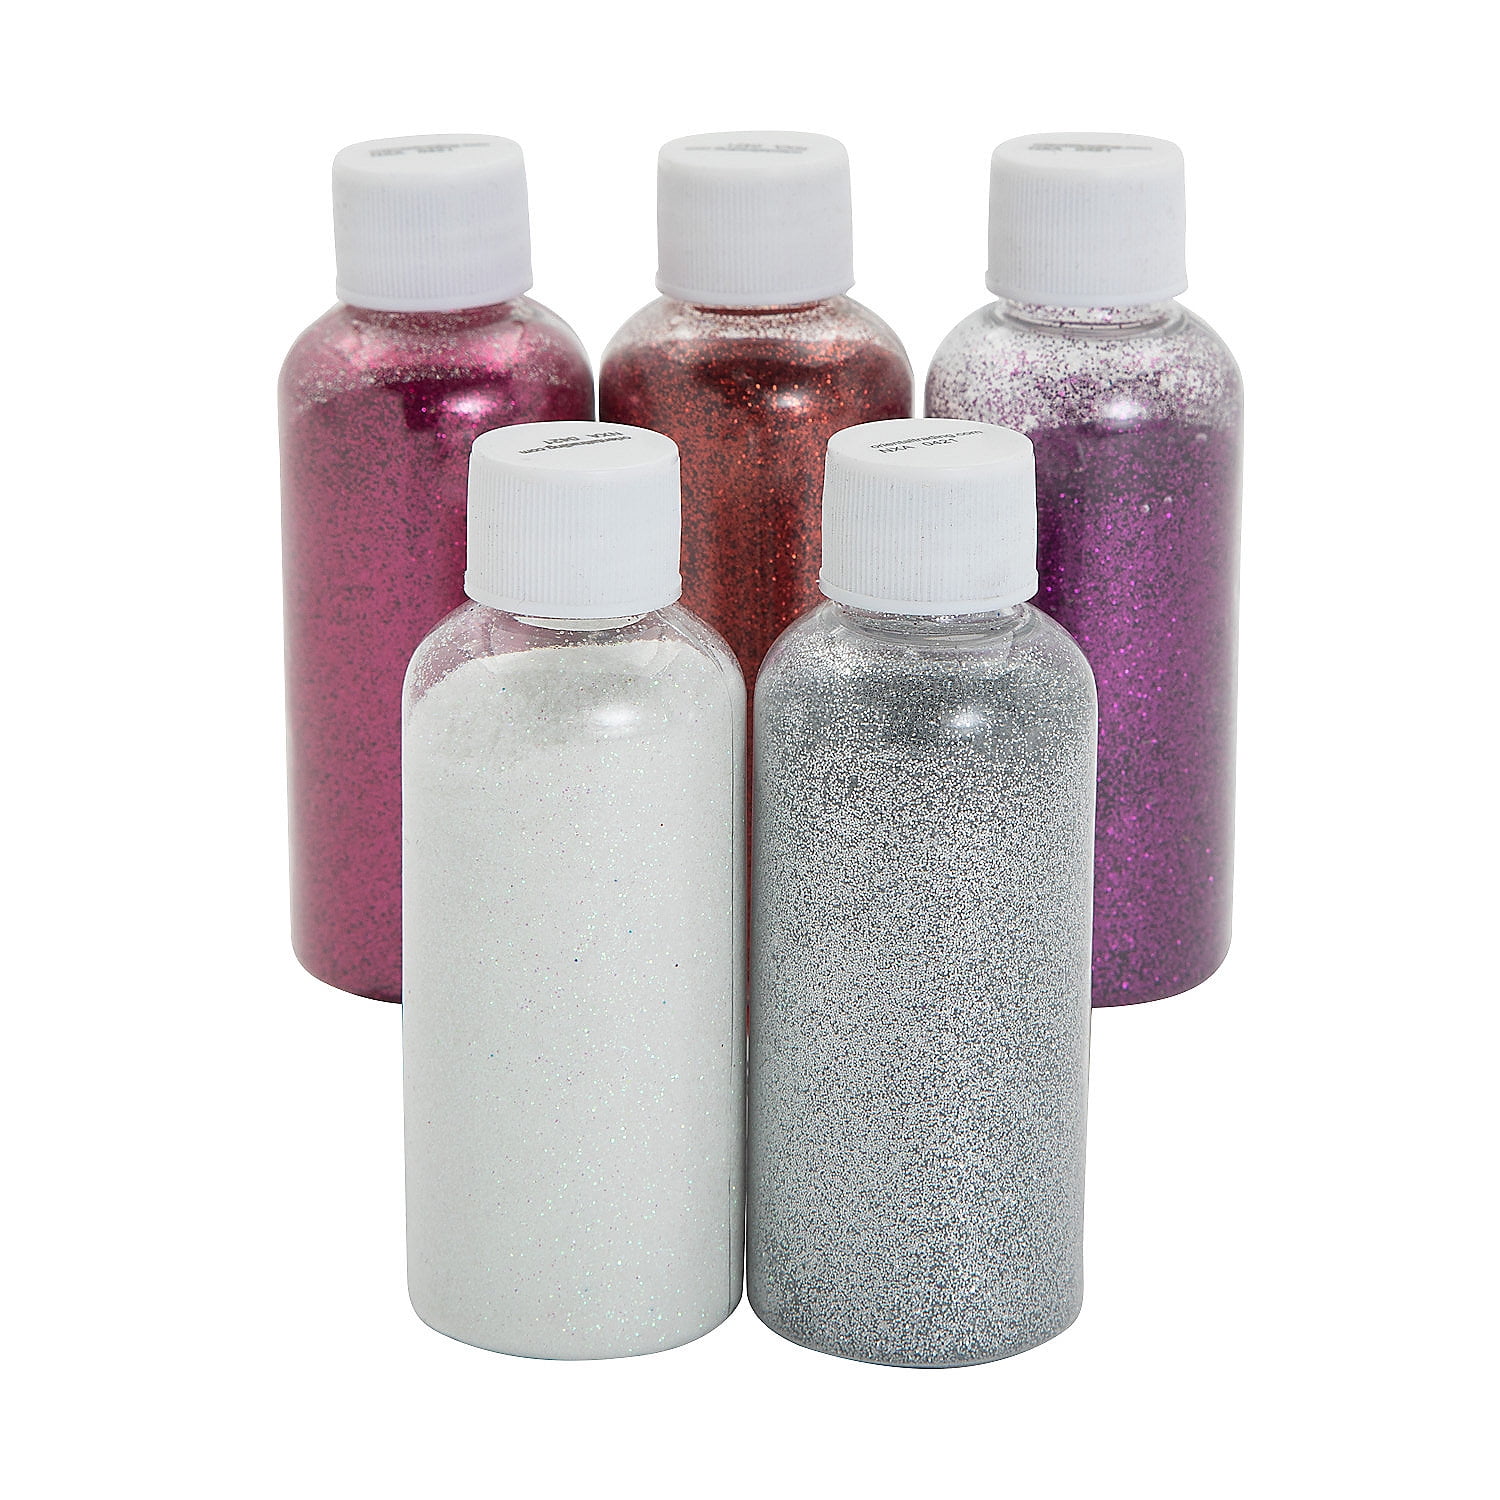 Sulyn Extra Fine Glitter 2.5 oz. Lot 3 Ruby, Sterling, Cherry Blossom  Non-Toxic